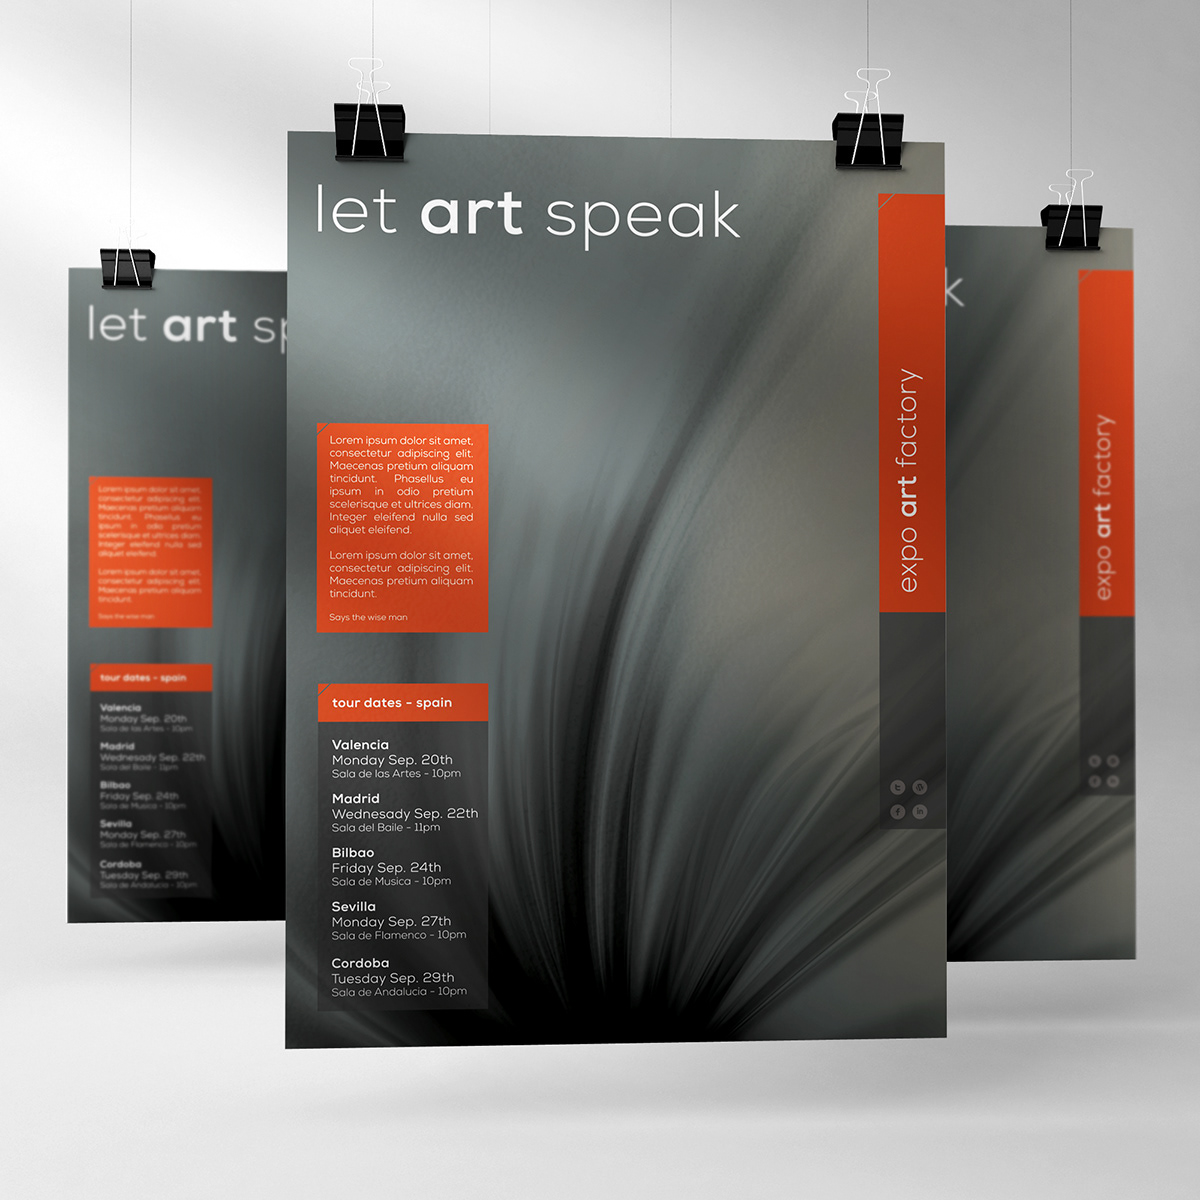 abstract art art show artistic business card Event expo flyer postcard poster Show